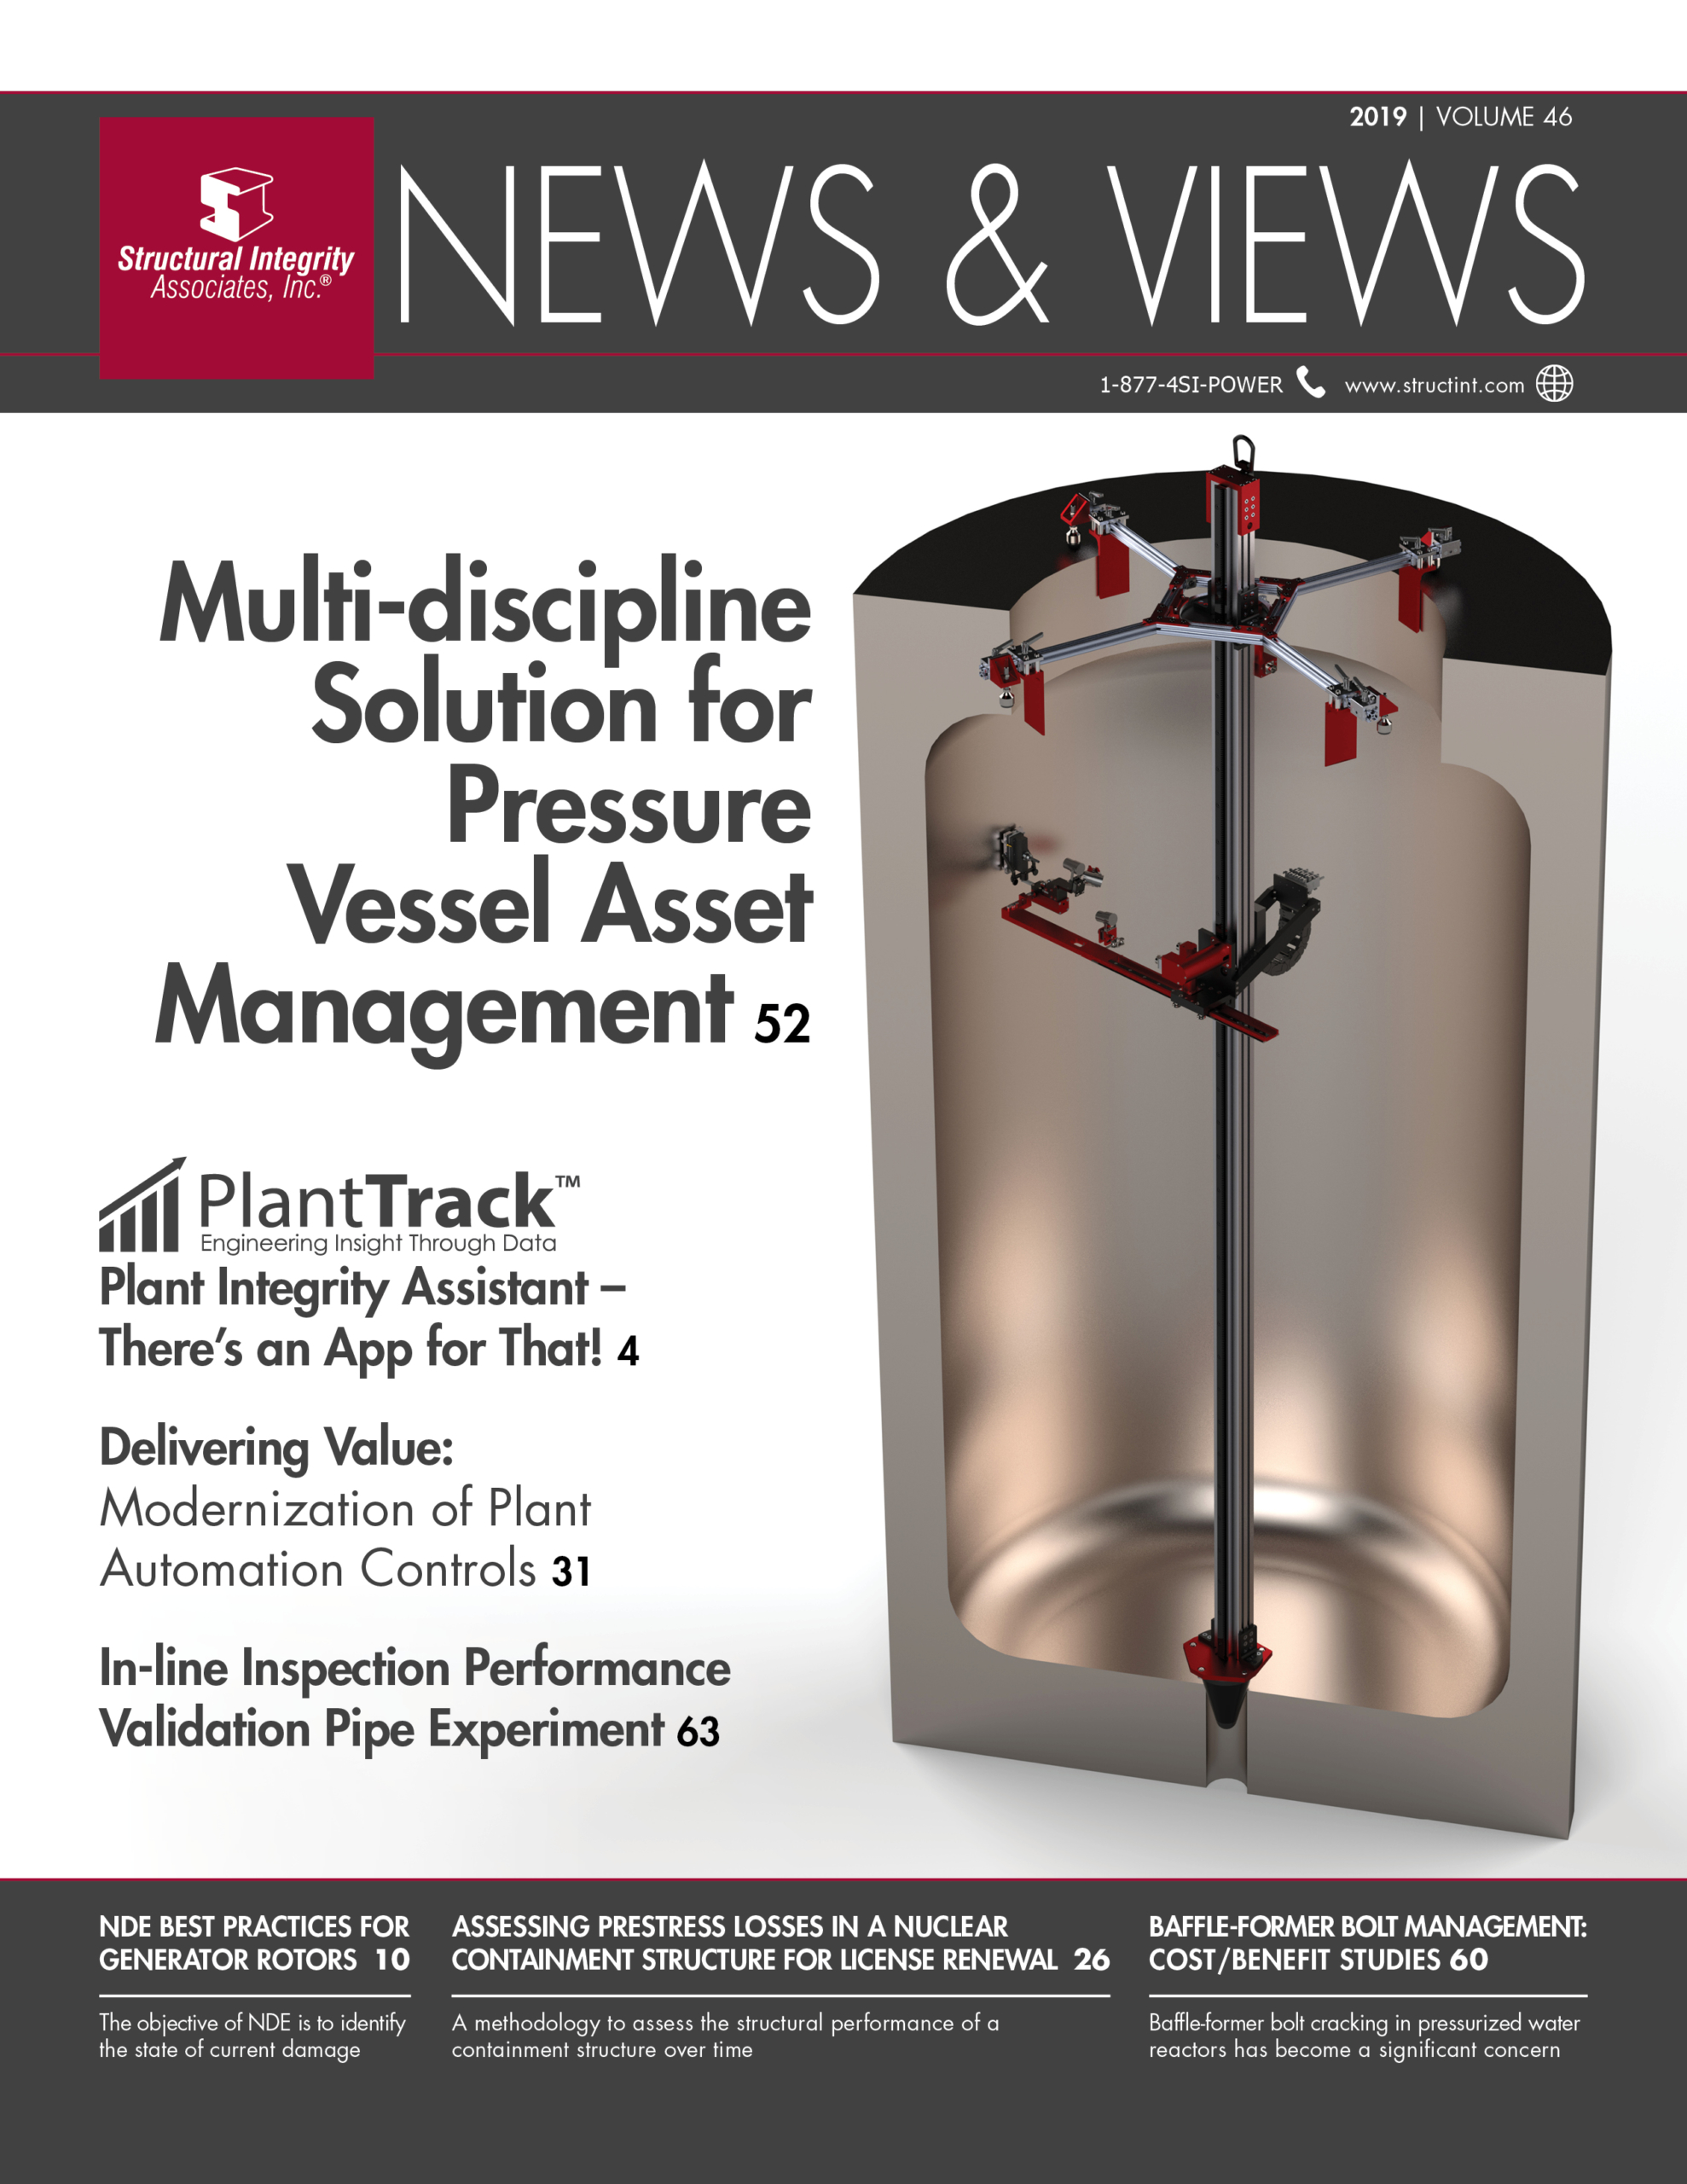 Structural Integrity Associates | News and Views Volume 46